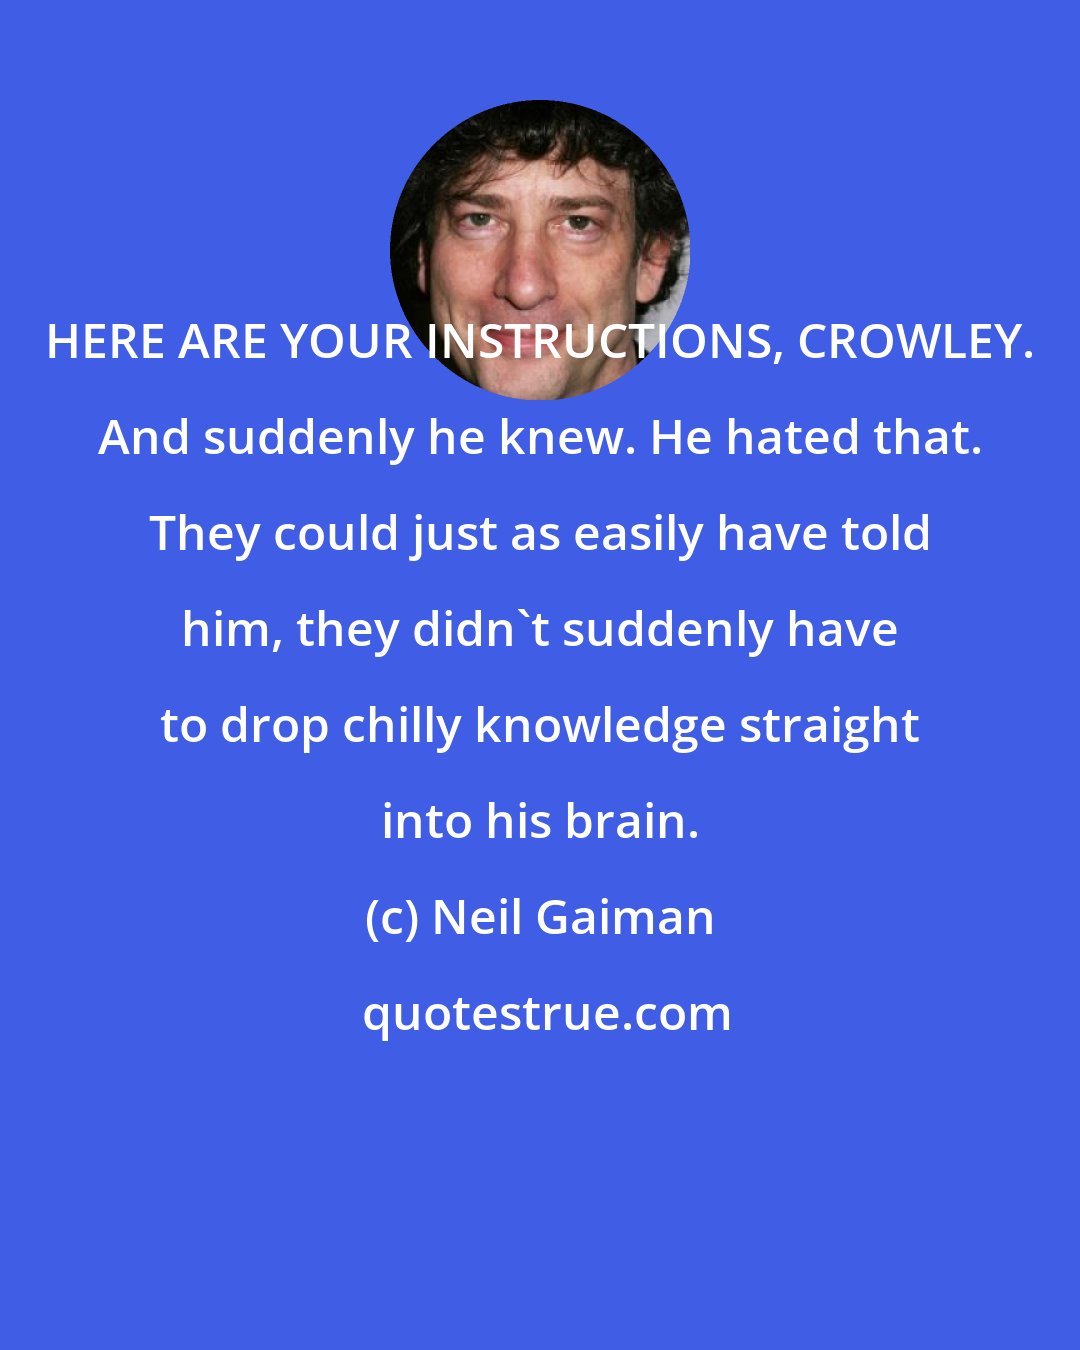 Neil Gaiman: HERE ARE YOUR INSTRUCTIONS, CROWLEY. And suddenly he knew. He hated that. They could just as easily have told him, they didn't suddenly have to drop chilly knowledge straight into his brain.